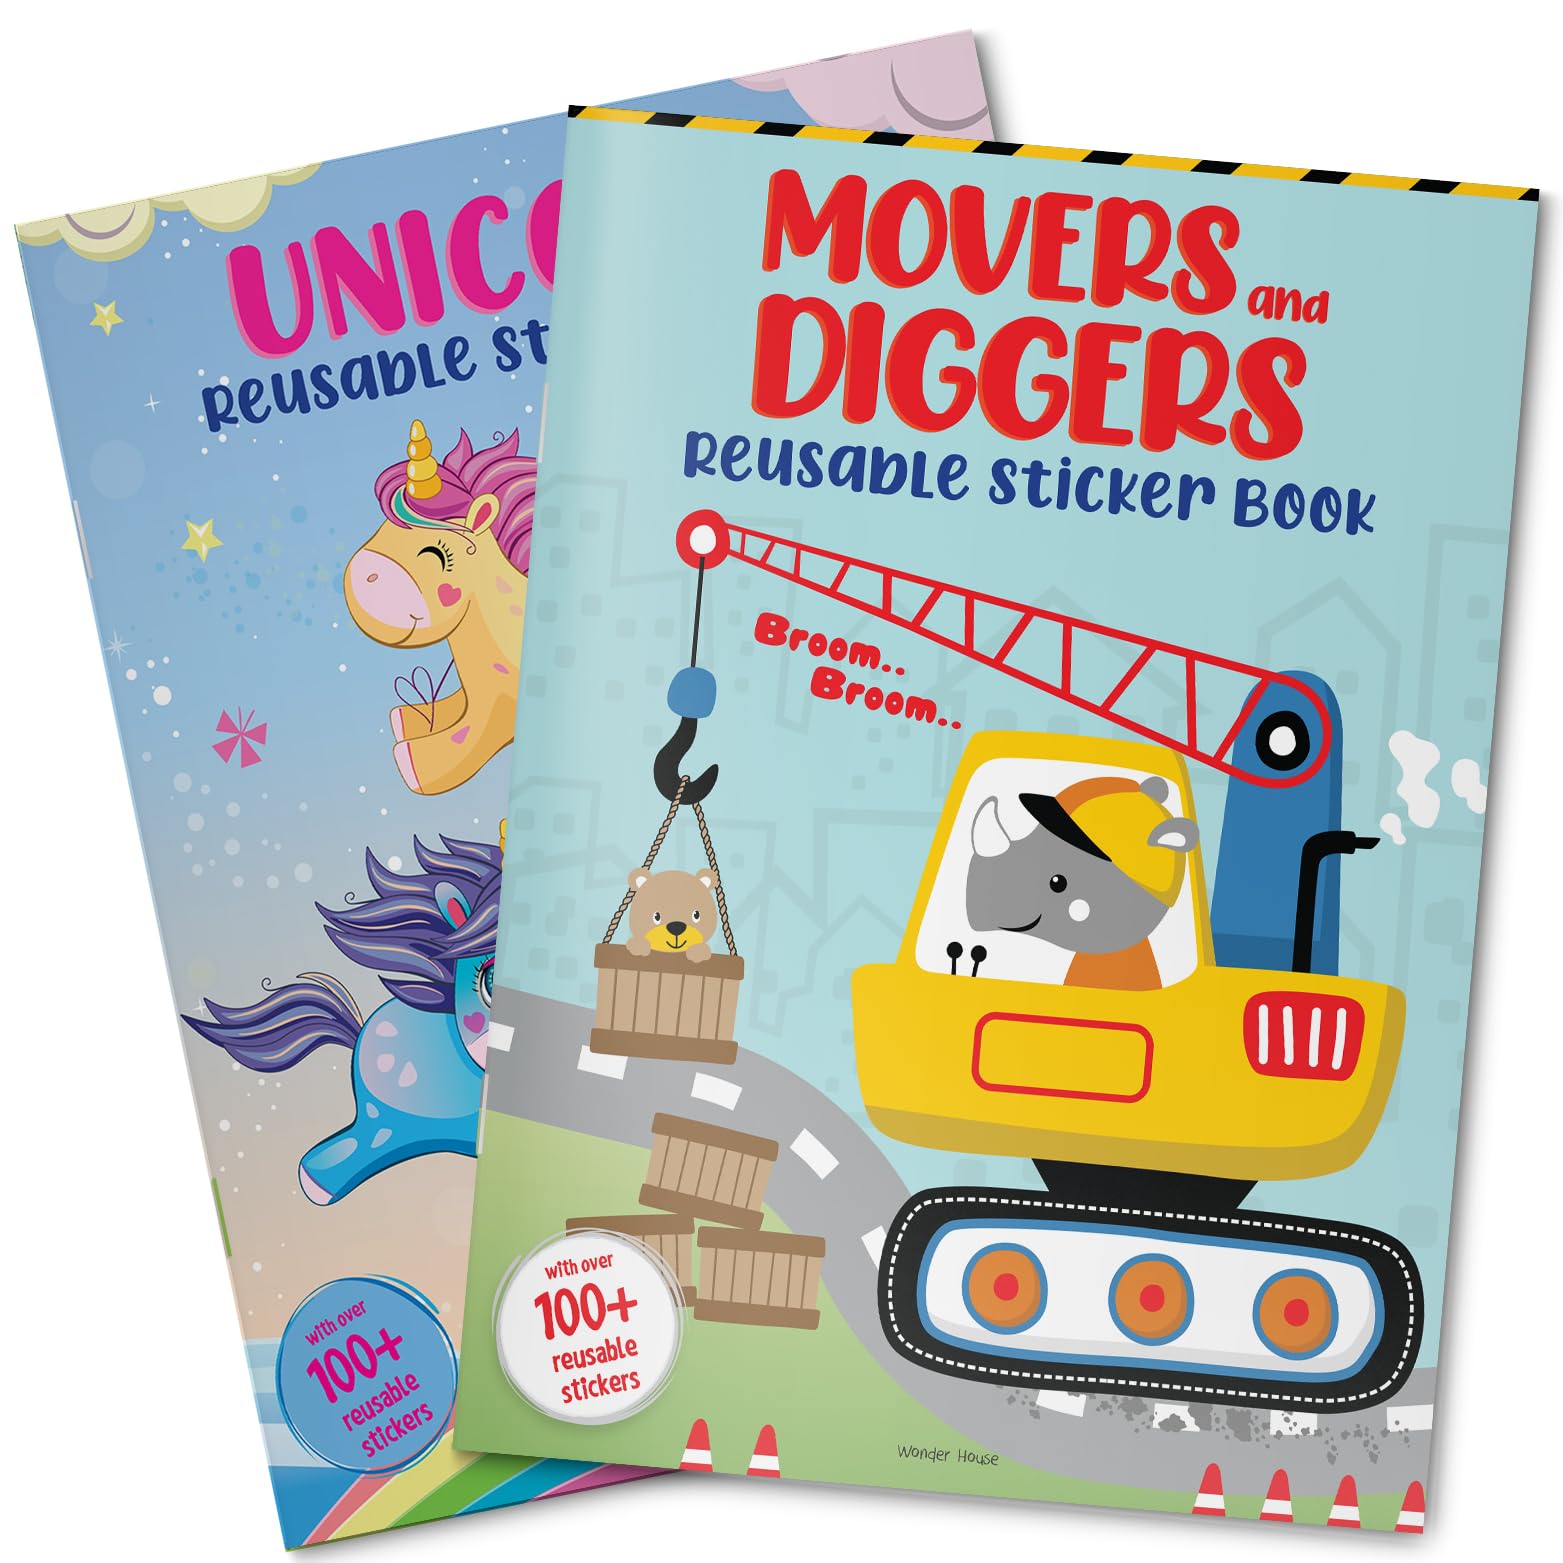 Movers and Diggers Reusable Sticker Book�For Chindren [Paperback] Wonder House Books